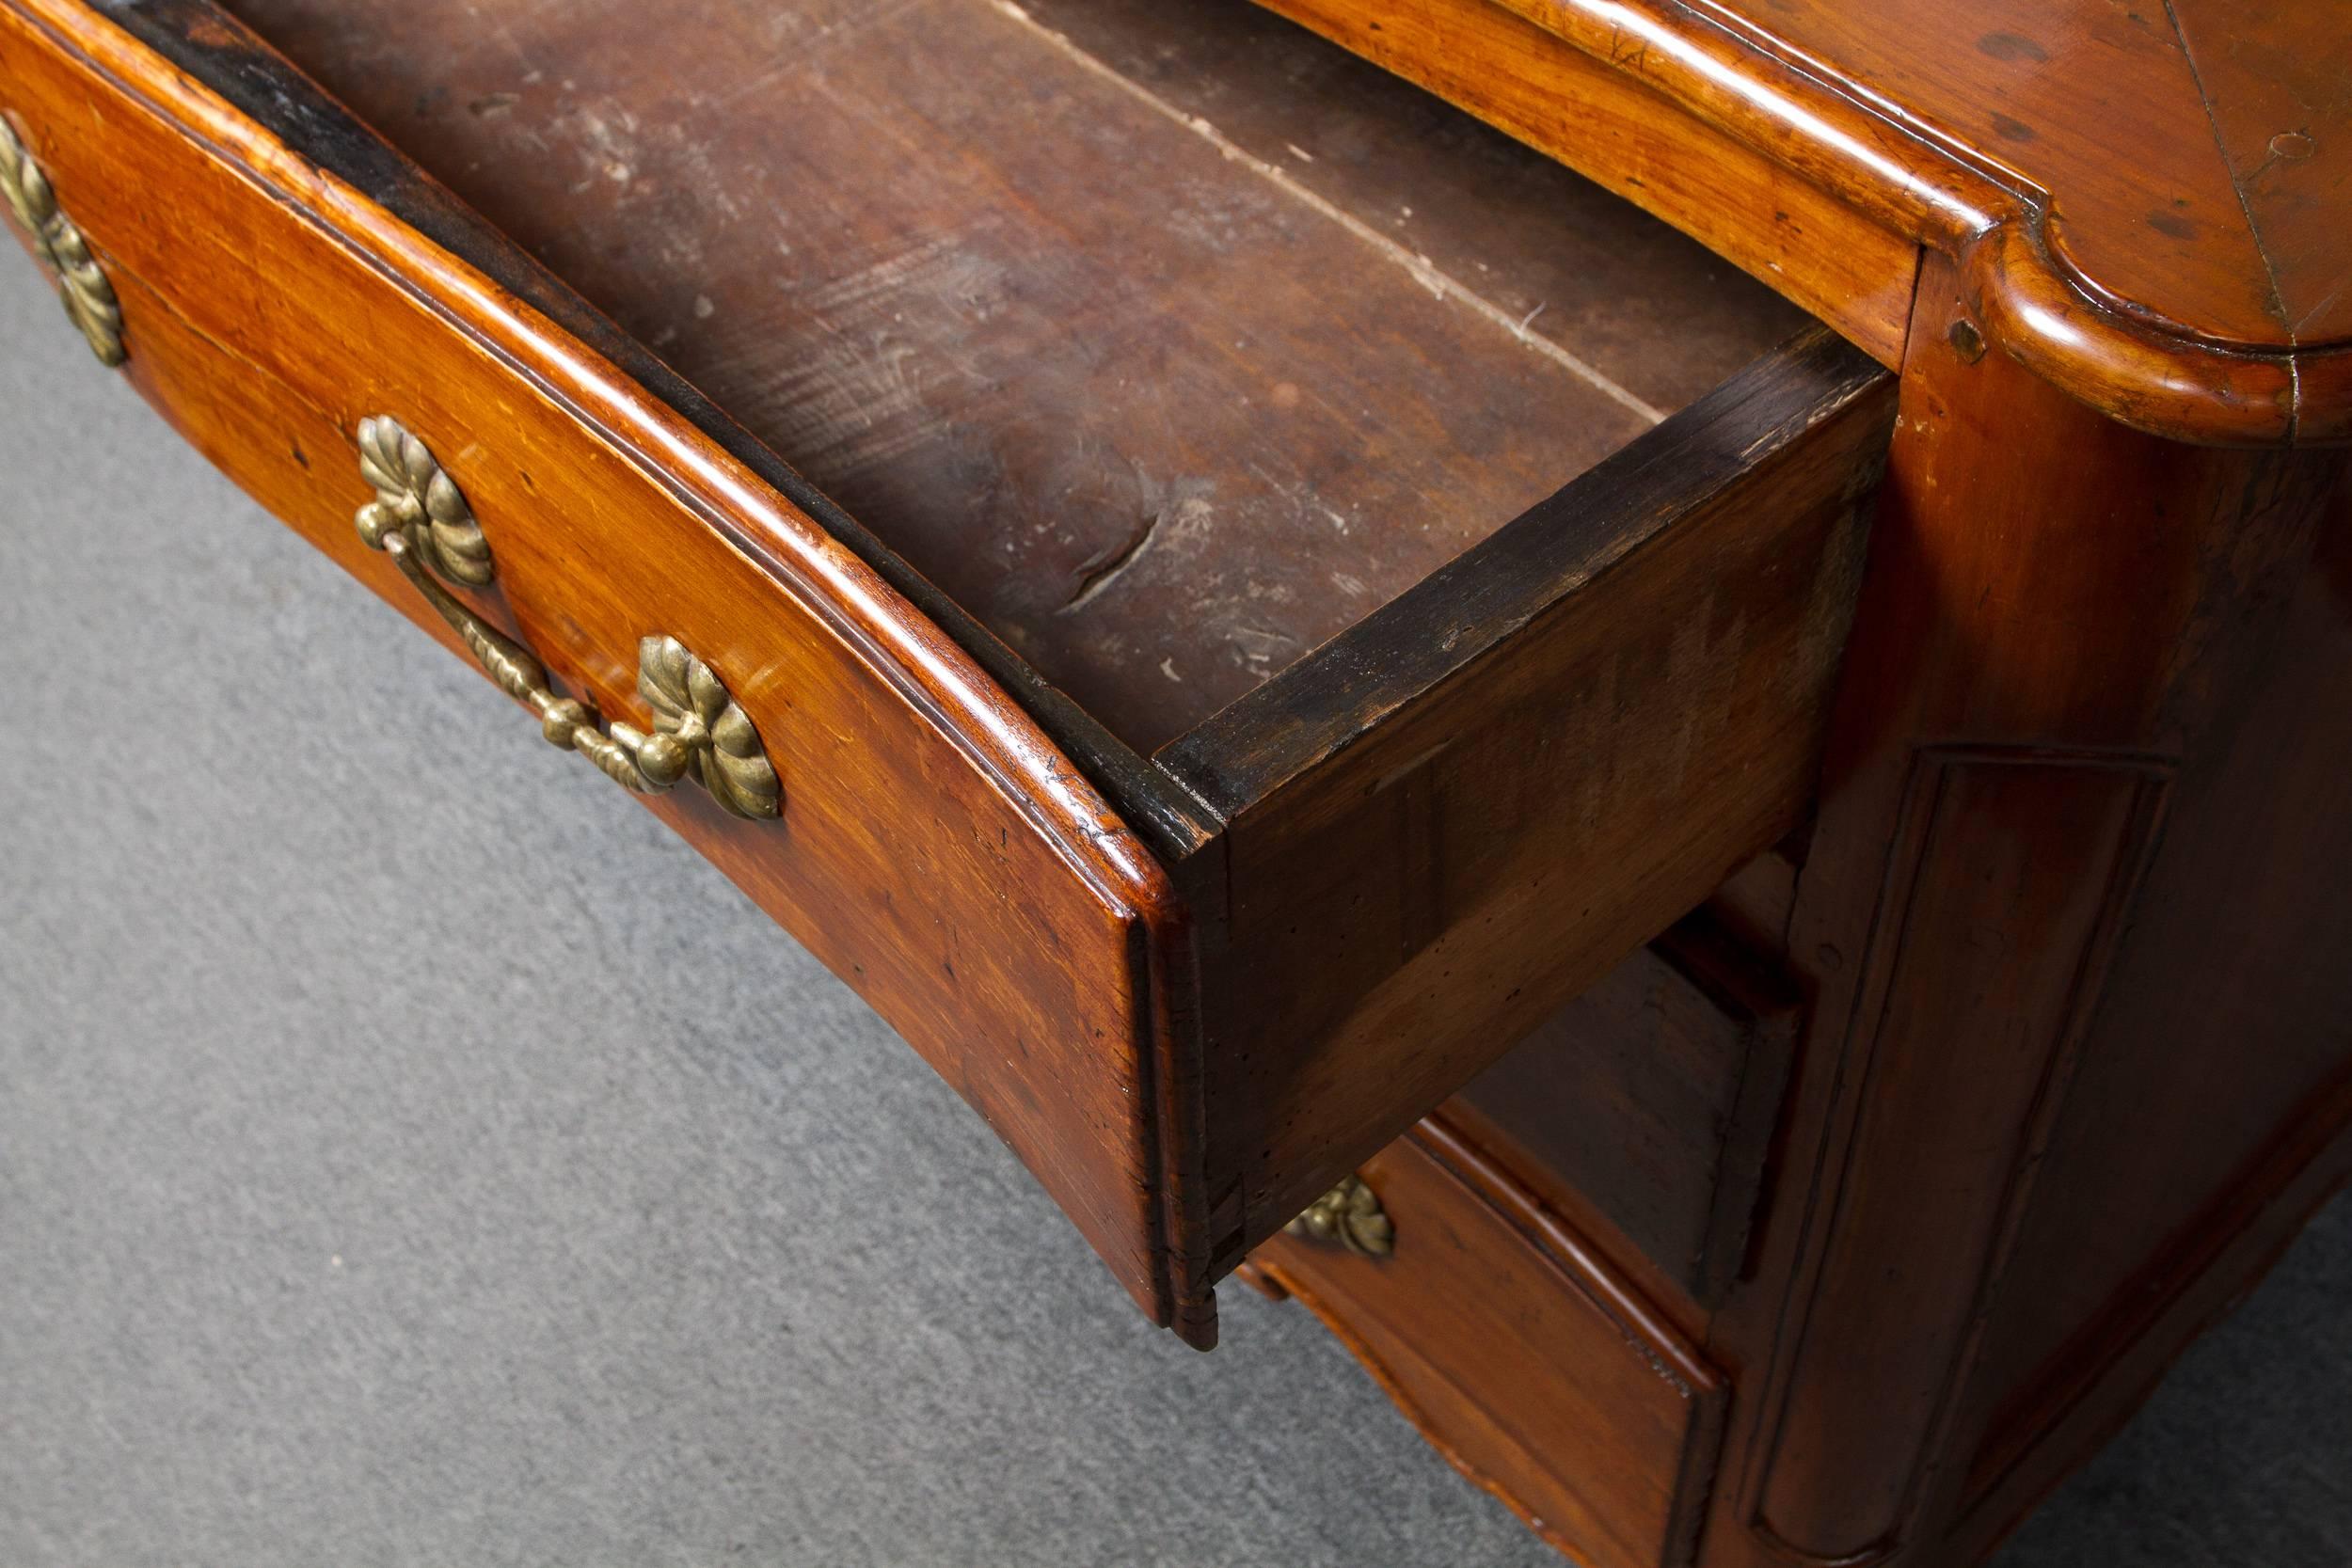 Lovely 18th century French Louis XV period cherrywood arbalete commode with three drawers and decorated with gilded bronze rosette on cabriole legs.